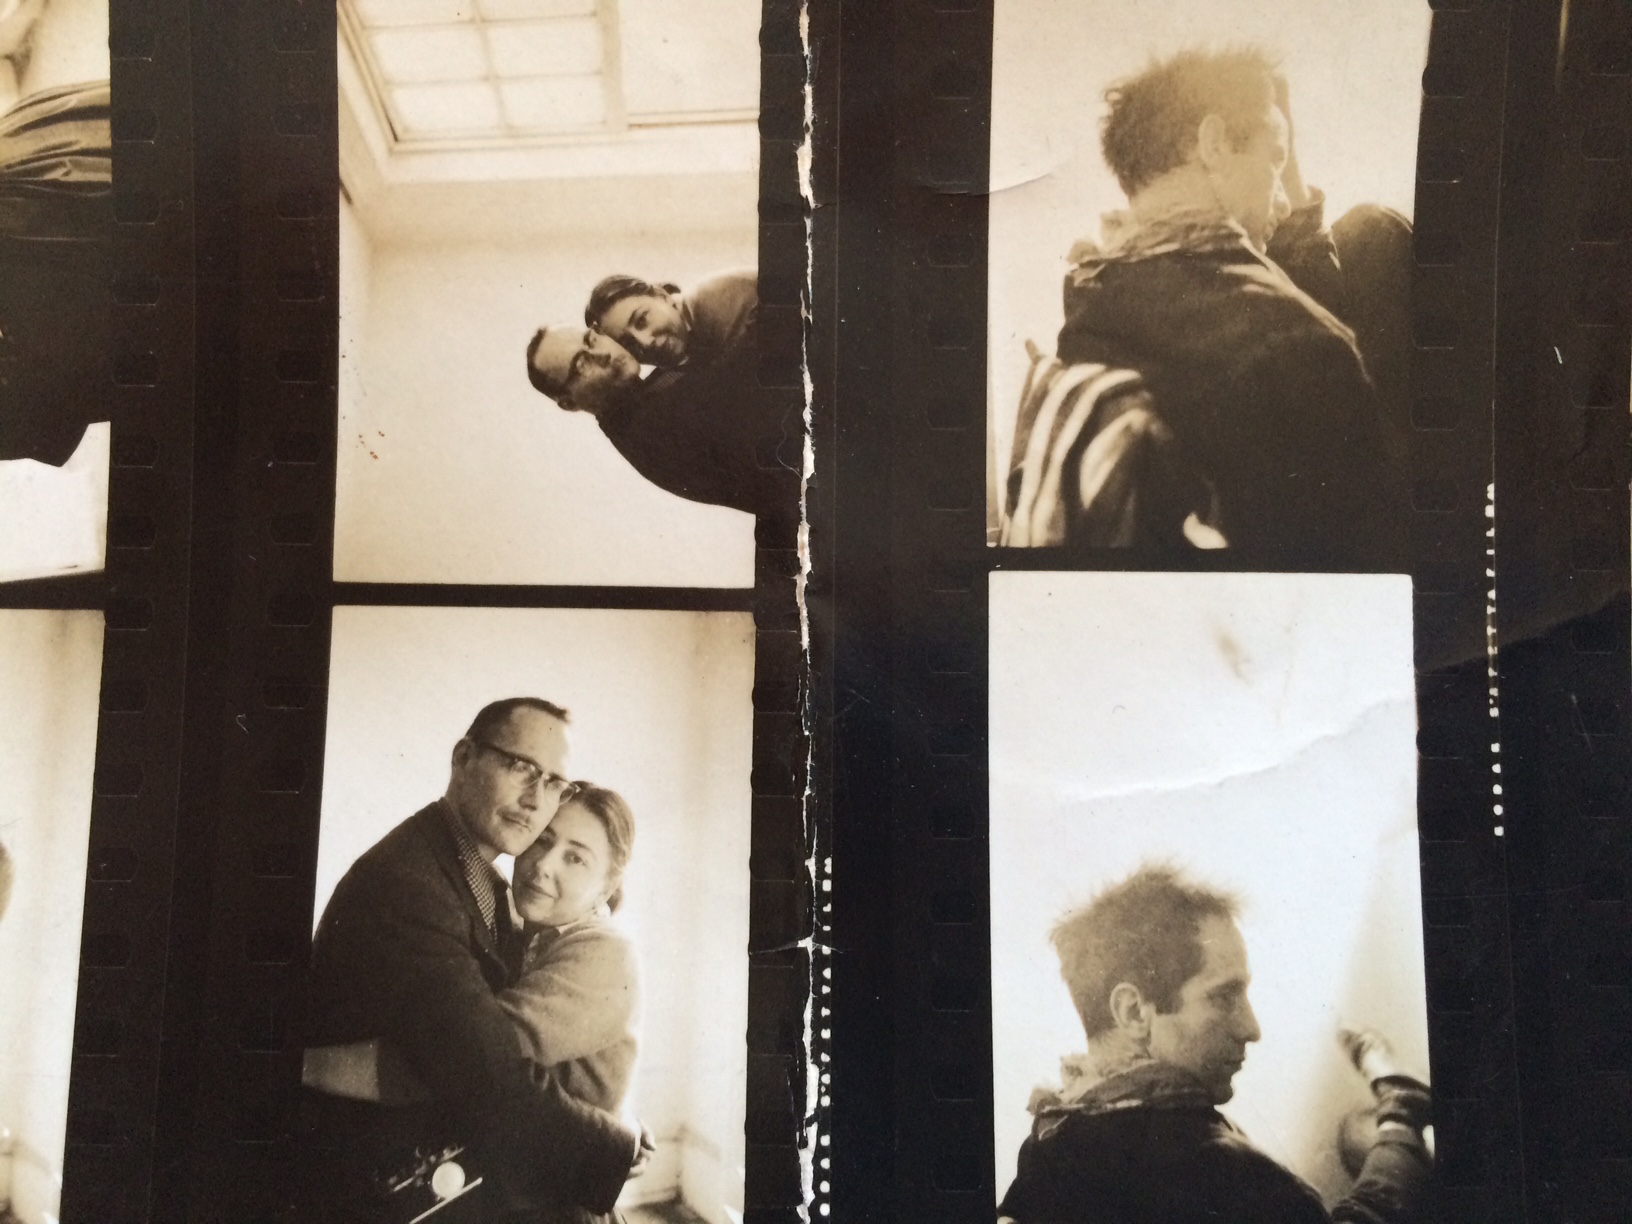 An old contact sheet from the Jazz Loft Days with W. Eugene Smith and Robert Frank.  Awaiting scanning!